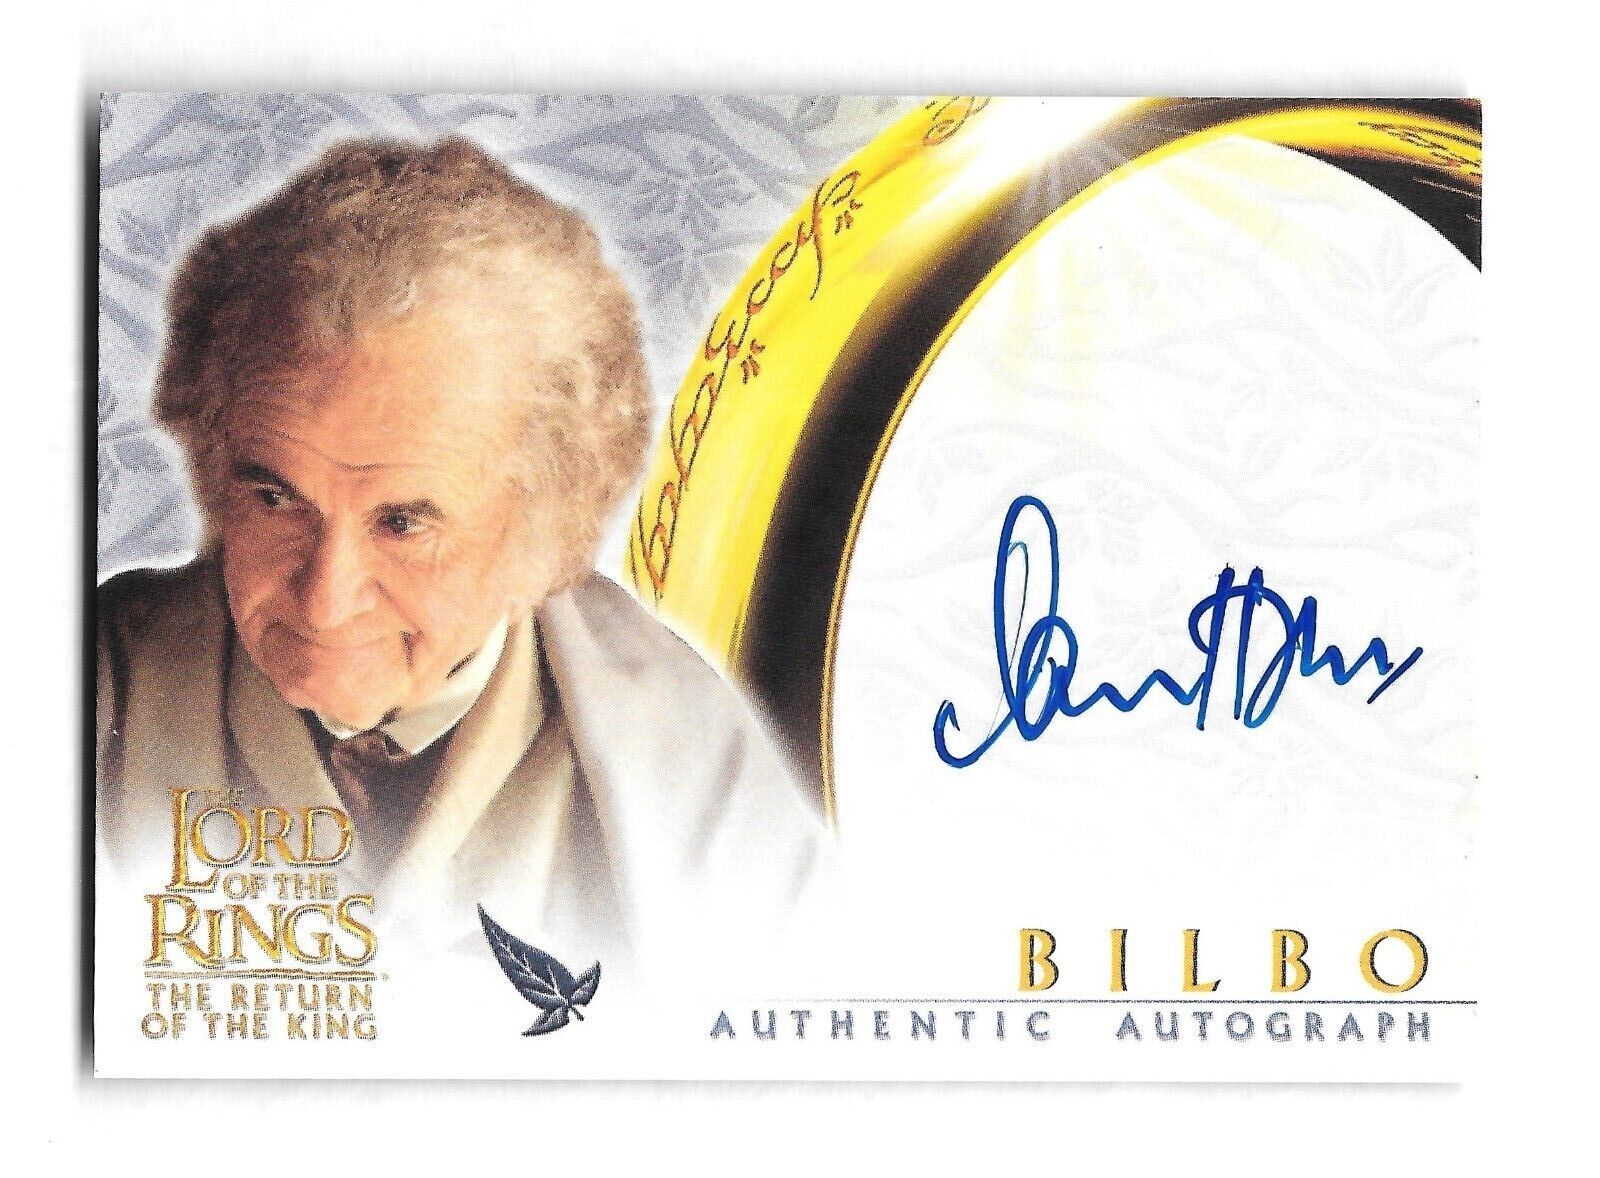 2003 Topps Lord of the Rings Return of the King Autograph Ian Holm Bilbo Baggins